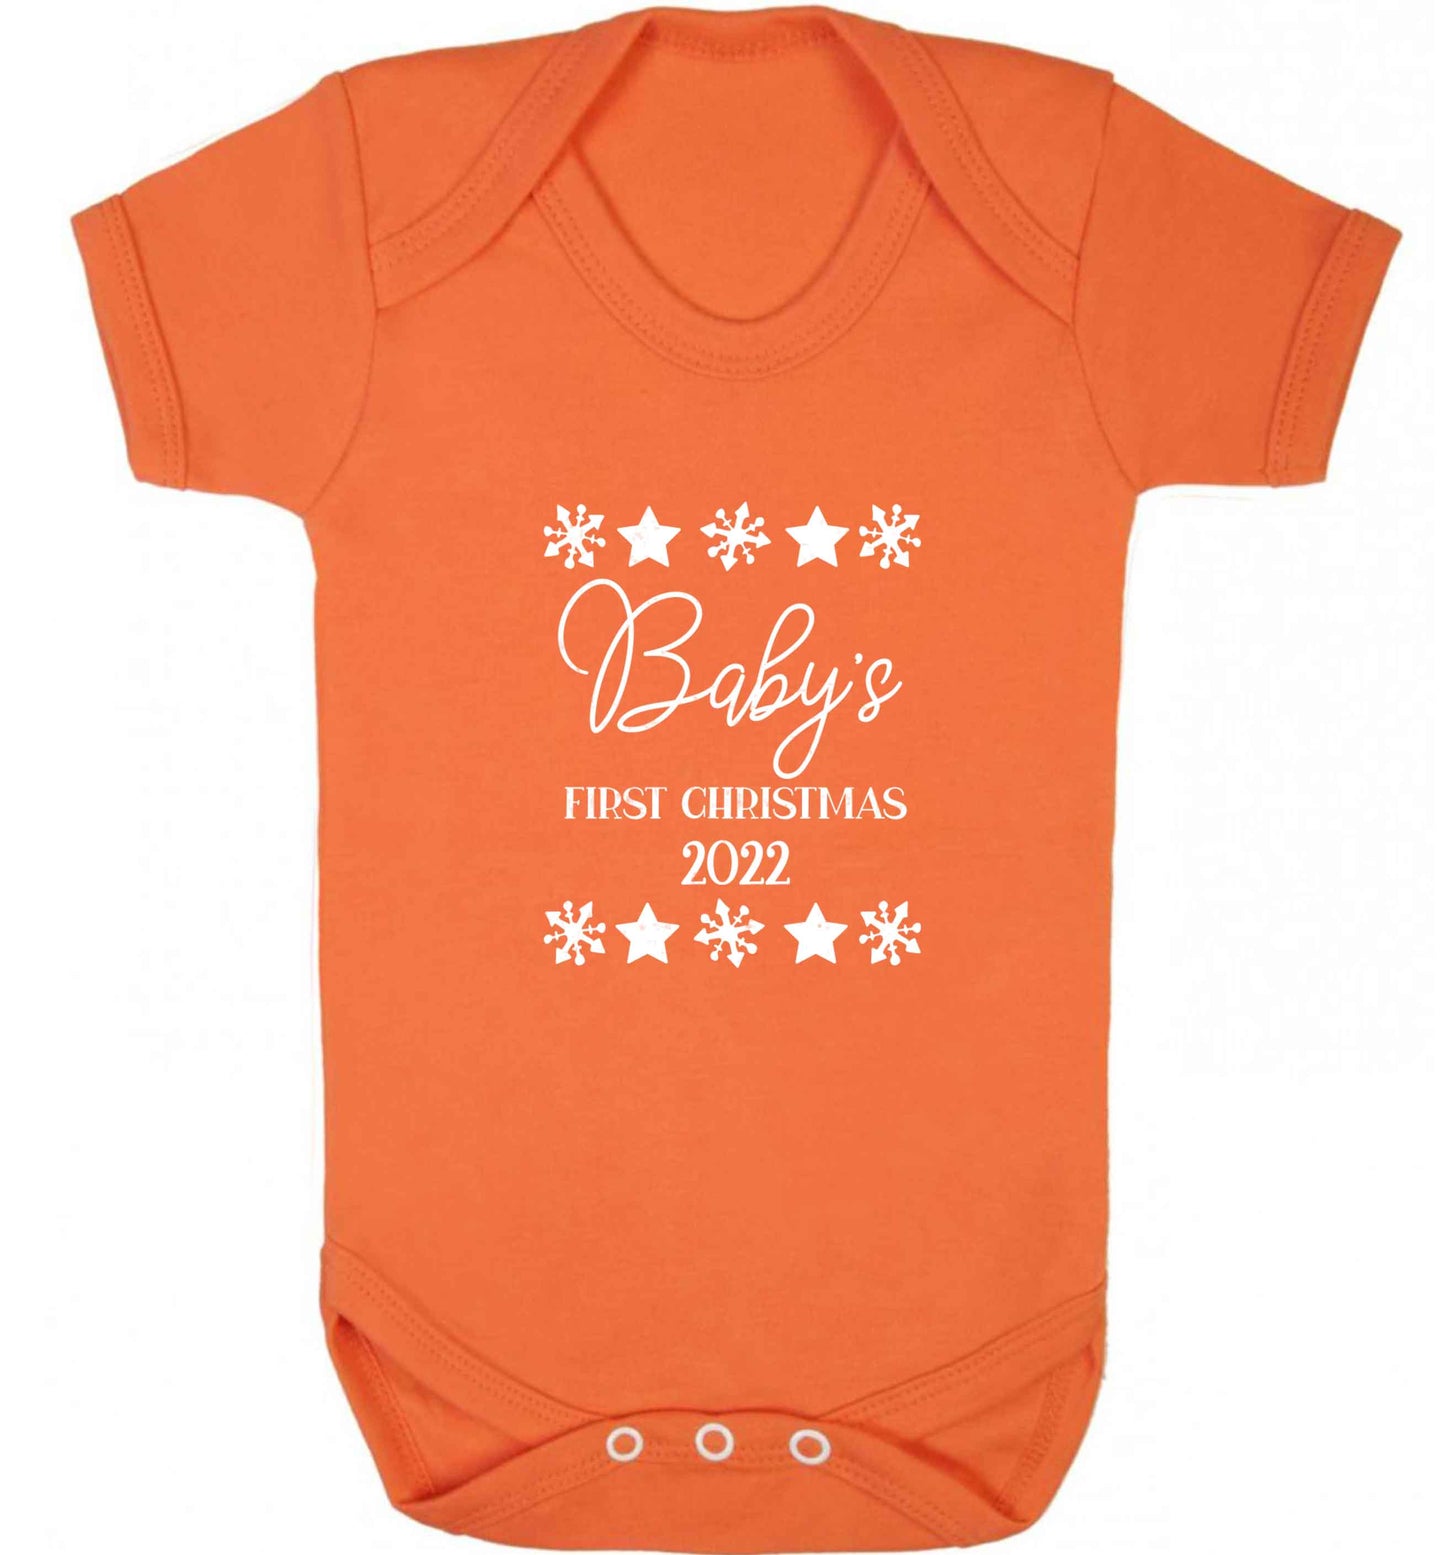 Baby's first Christmas baby vest orange 18-24 months